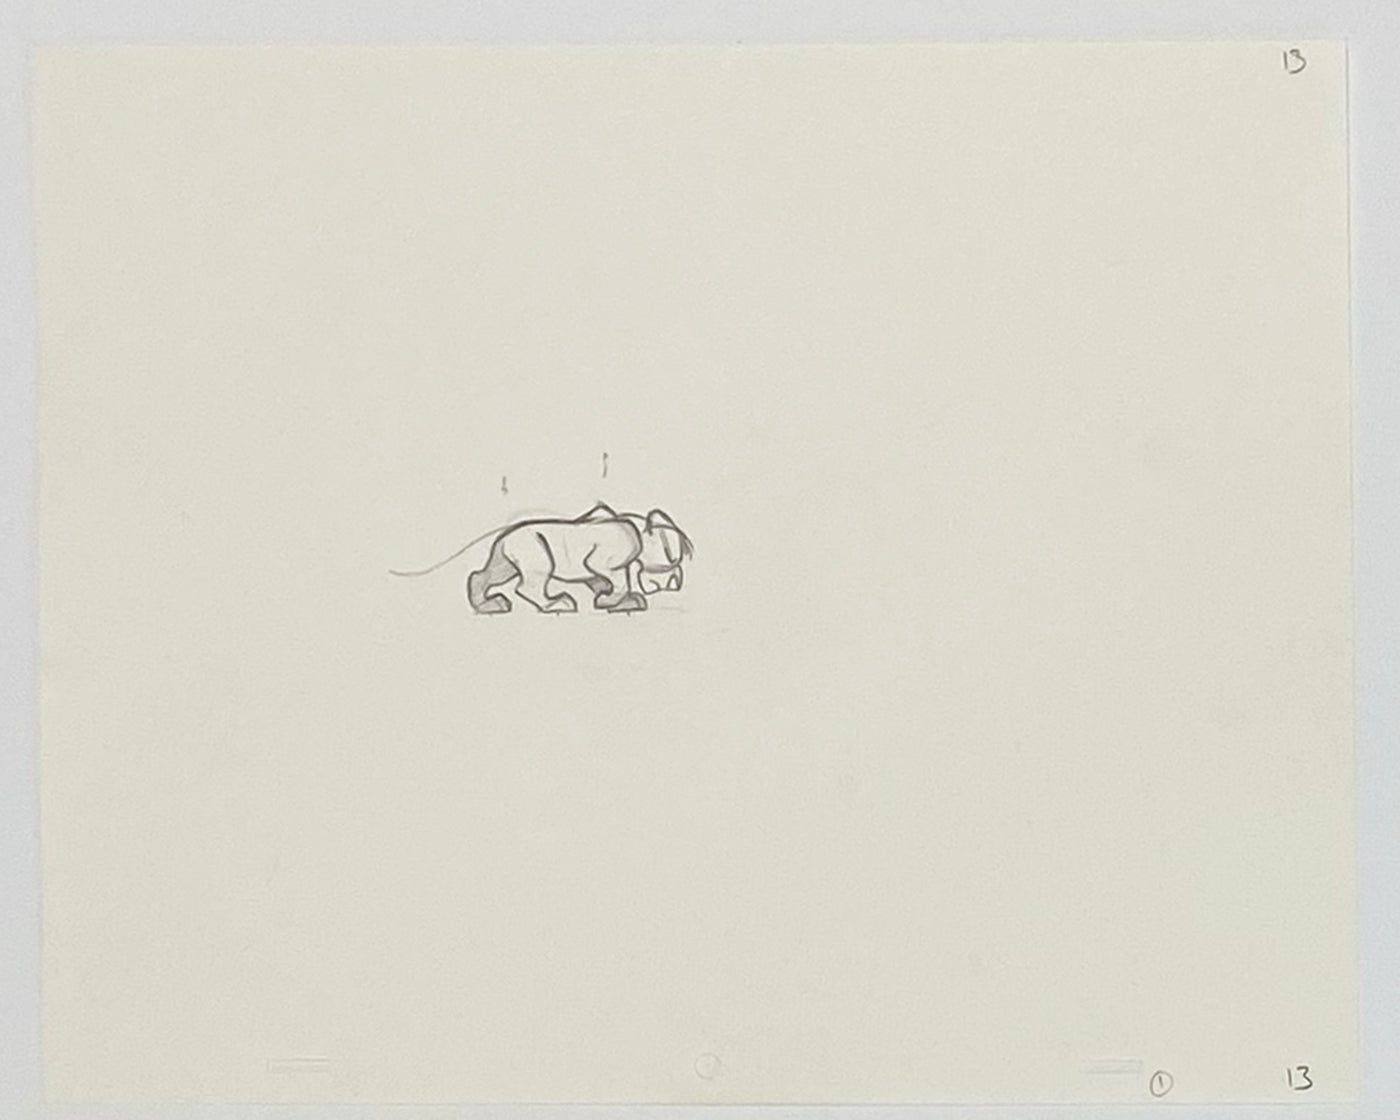 Original Walt Disney Sequence of 5 Production Drawings (B) from The Lion King featuring Simba